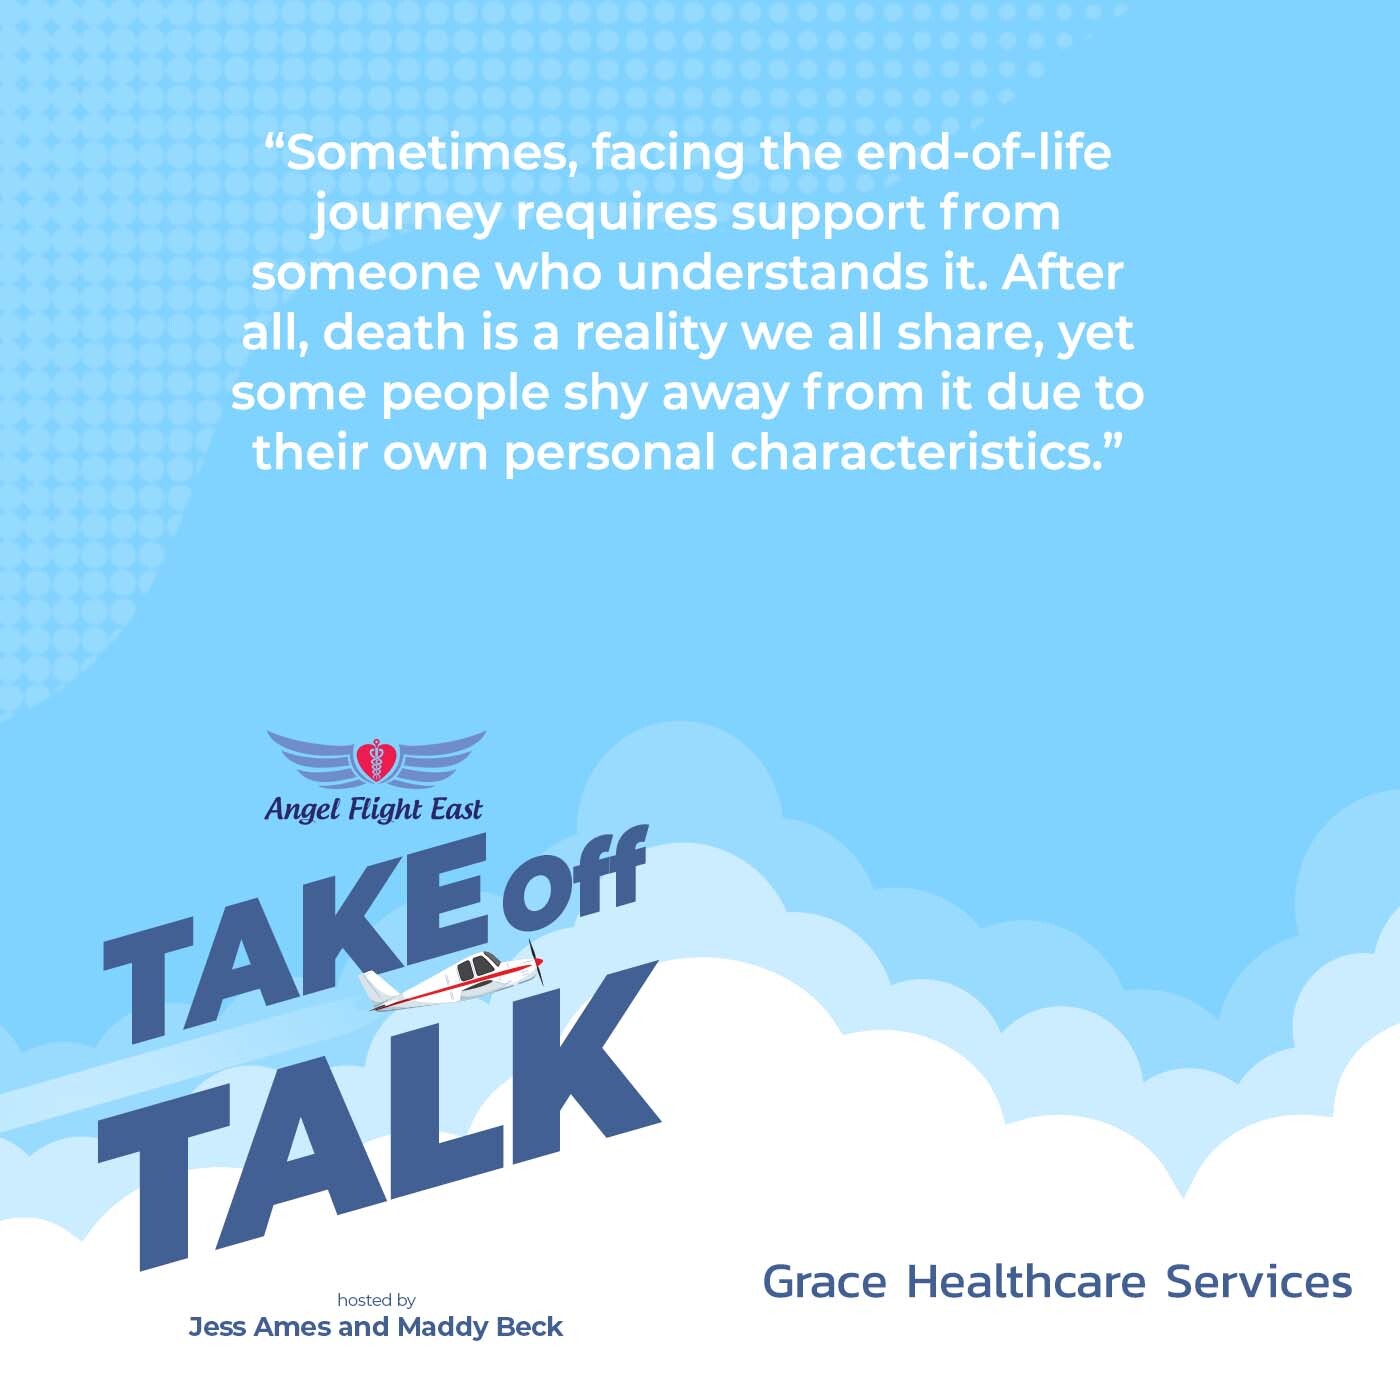 Take Off Talk with Angel Flight East | Jonathan | Grace Healthcare Services